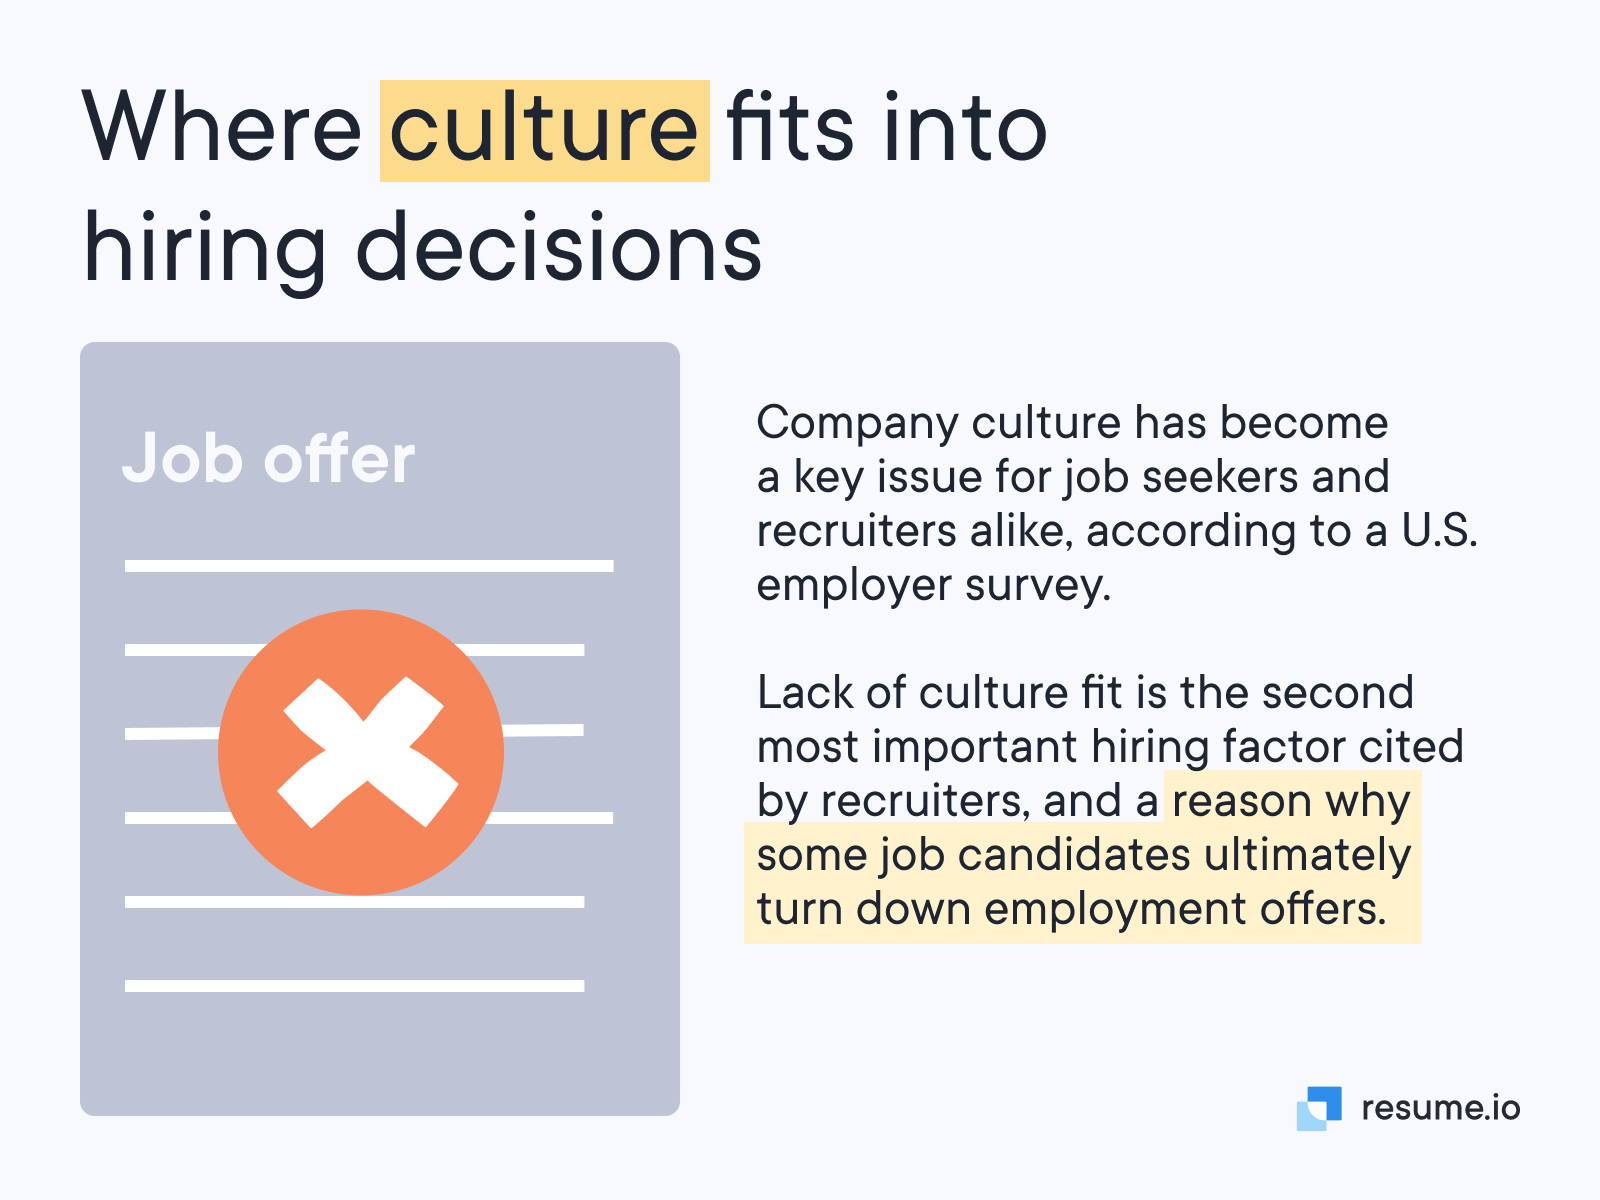 Where culture fits into hiring decisions